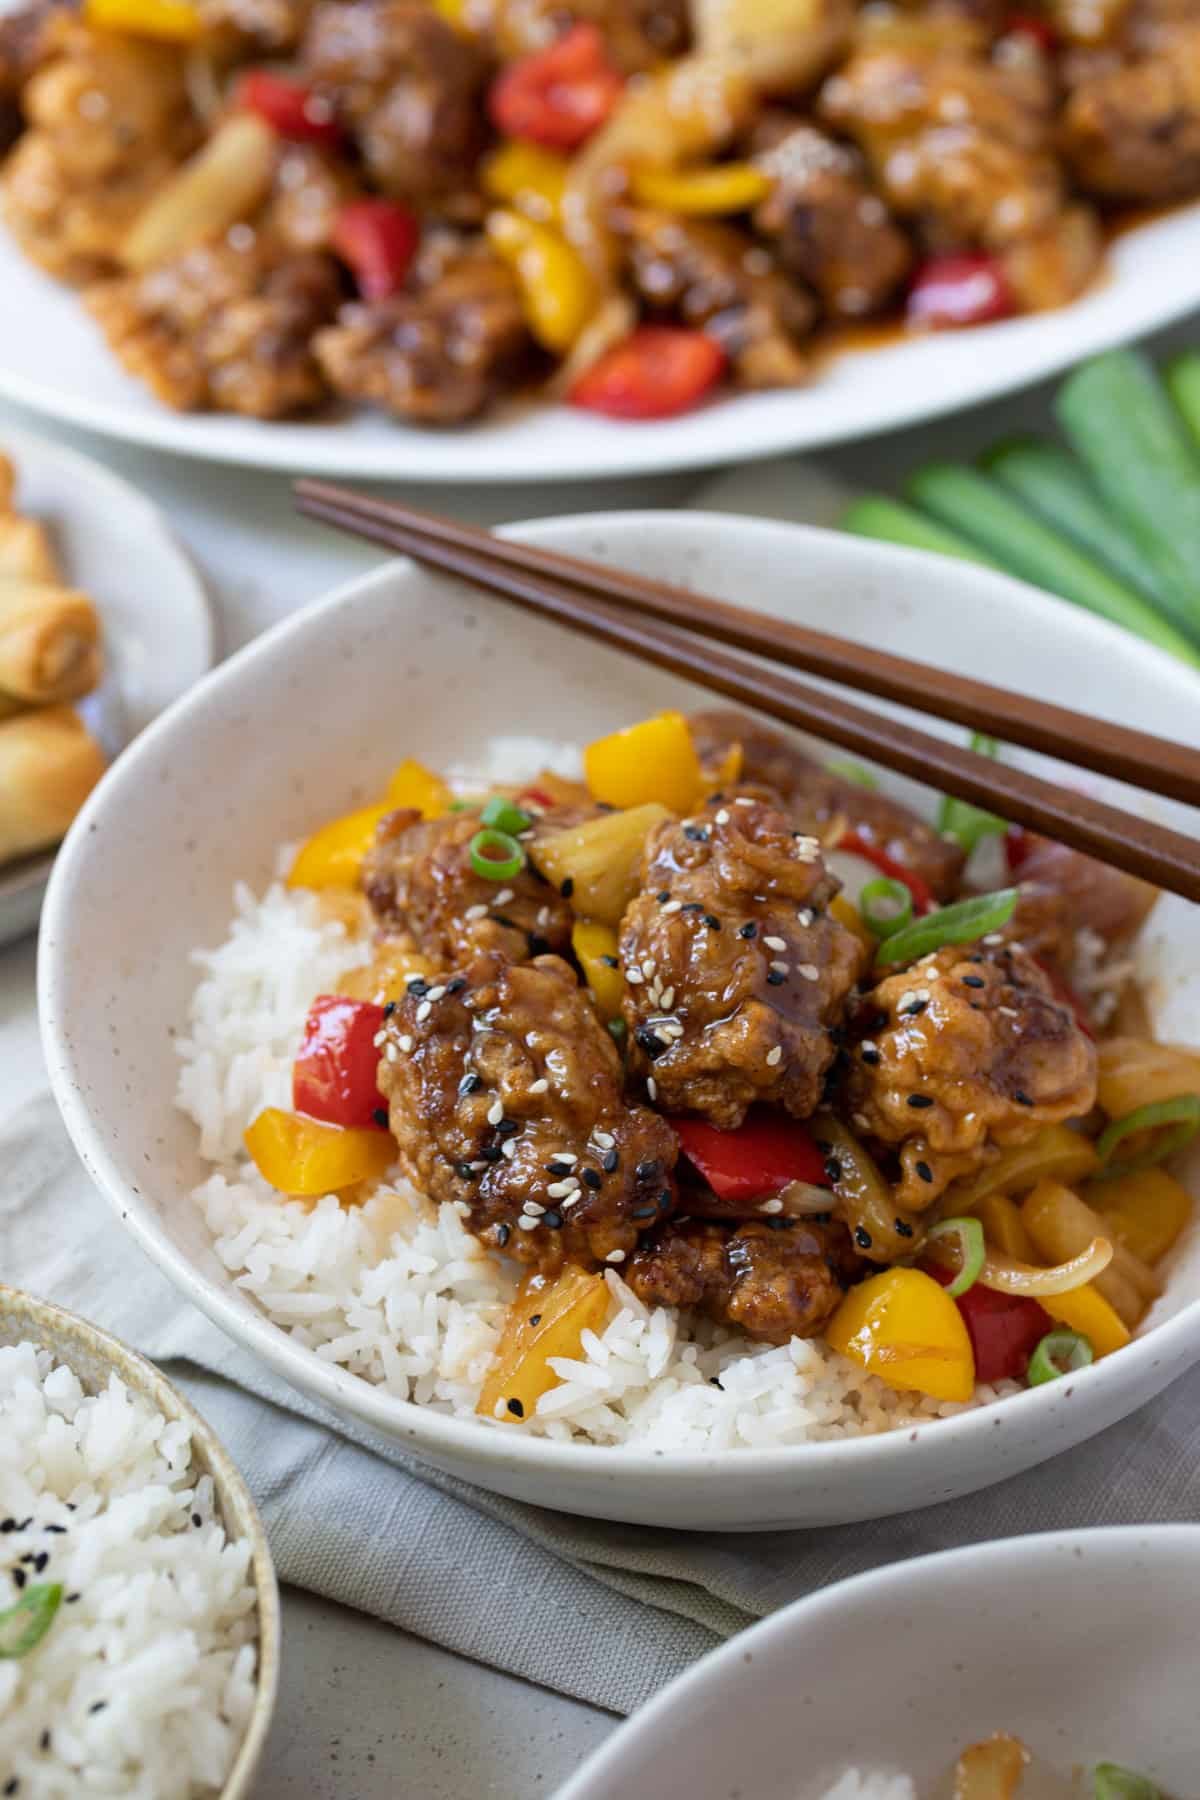 battered sweet and sour pork in a bowl with rice and pieces of pineapple.